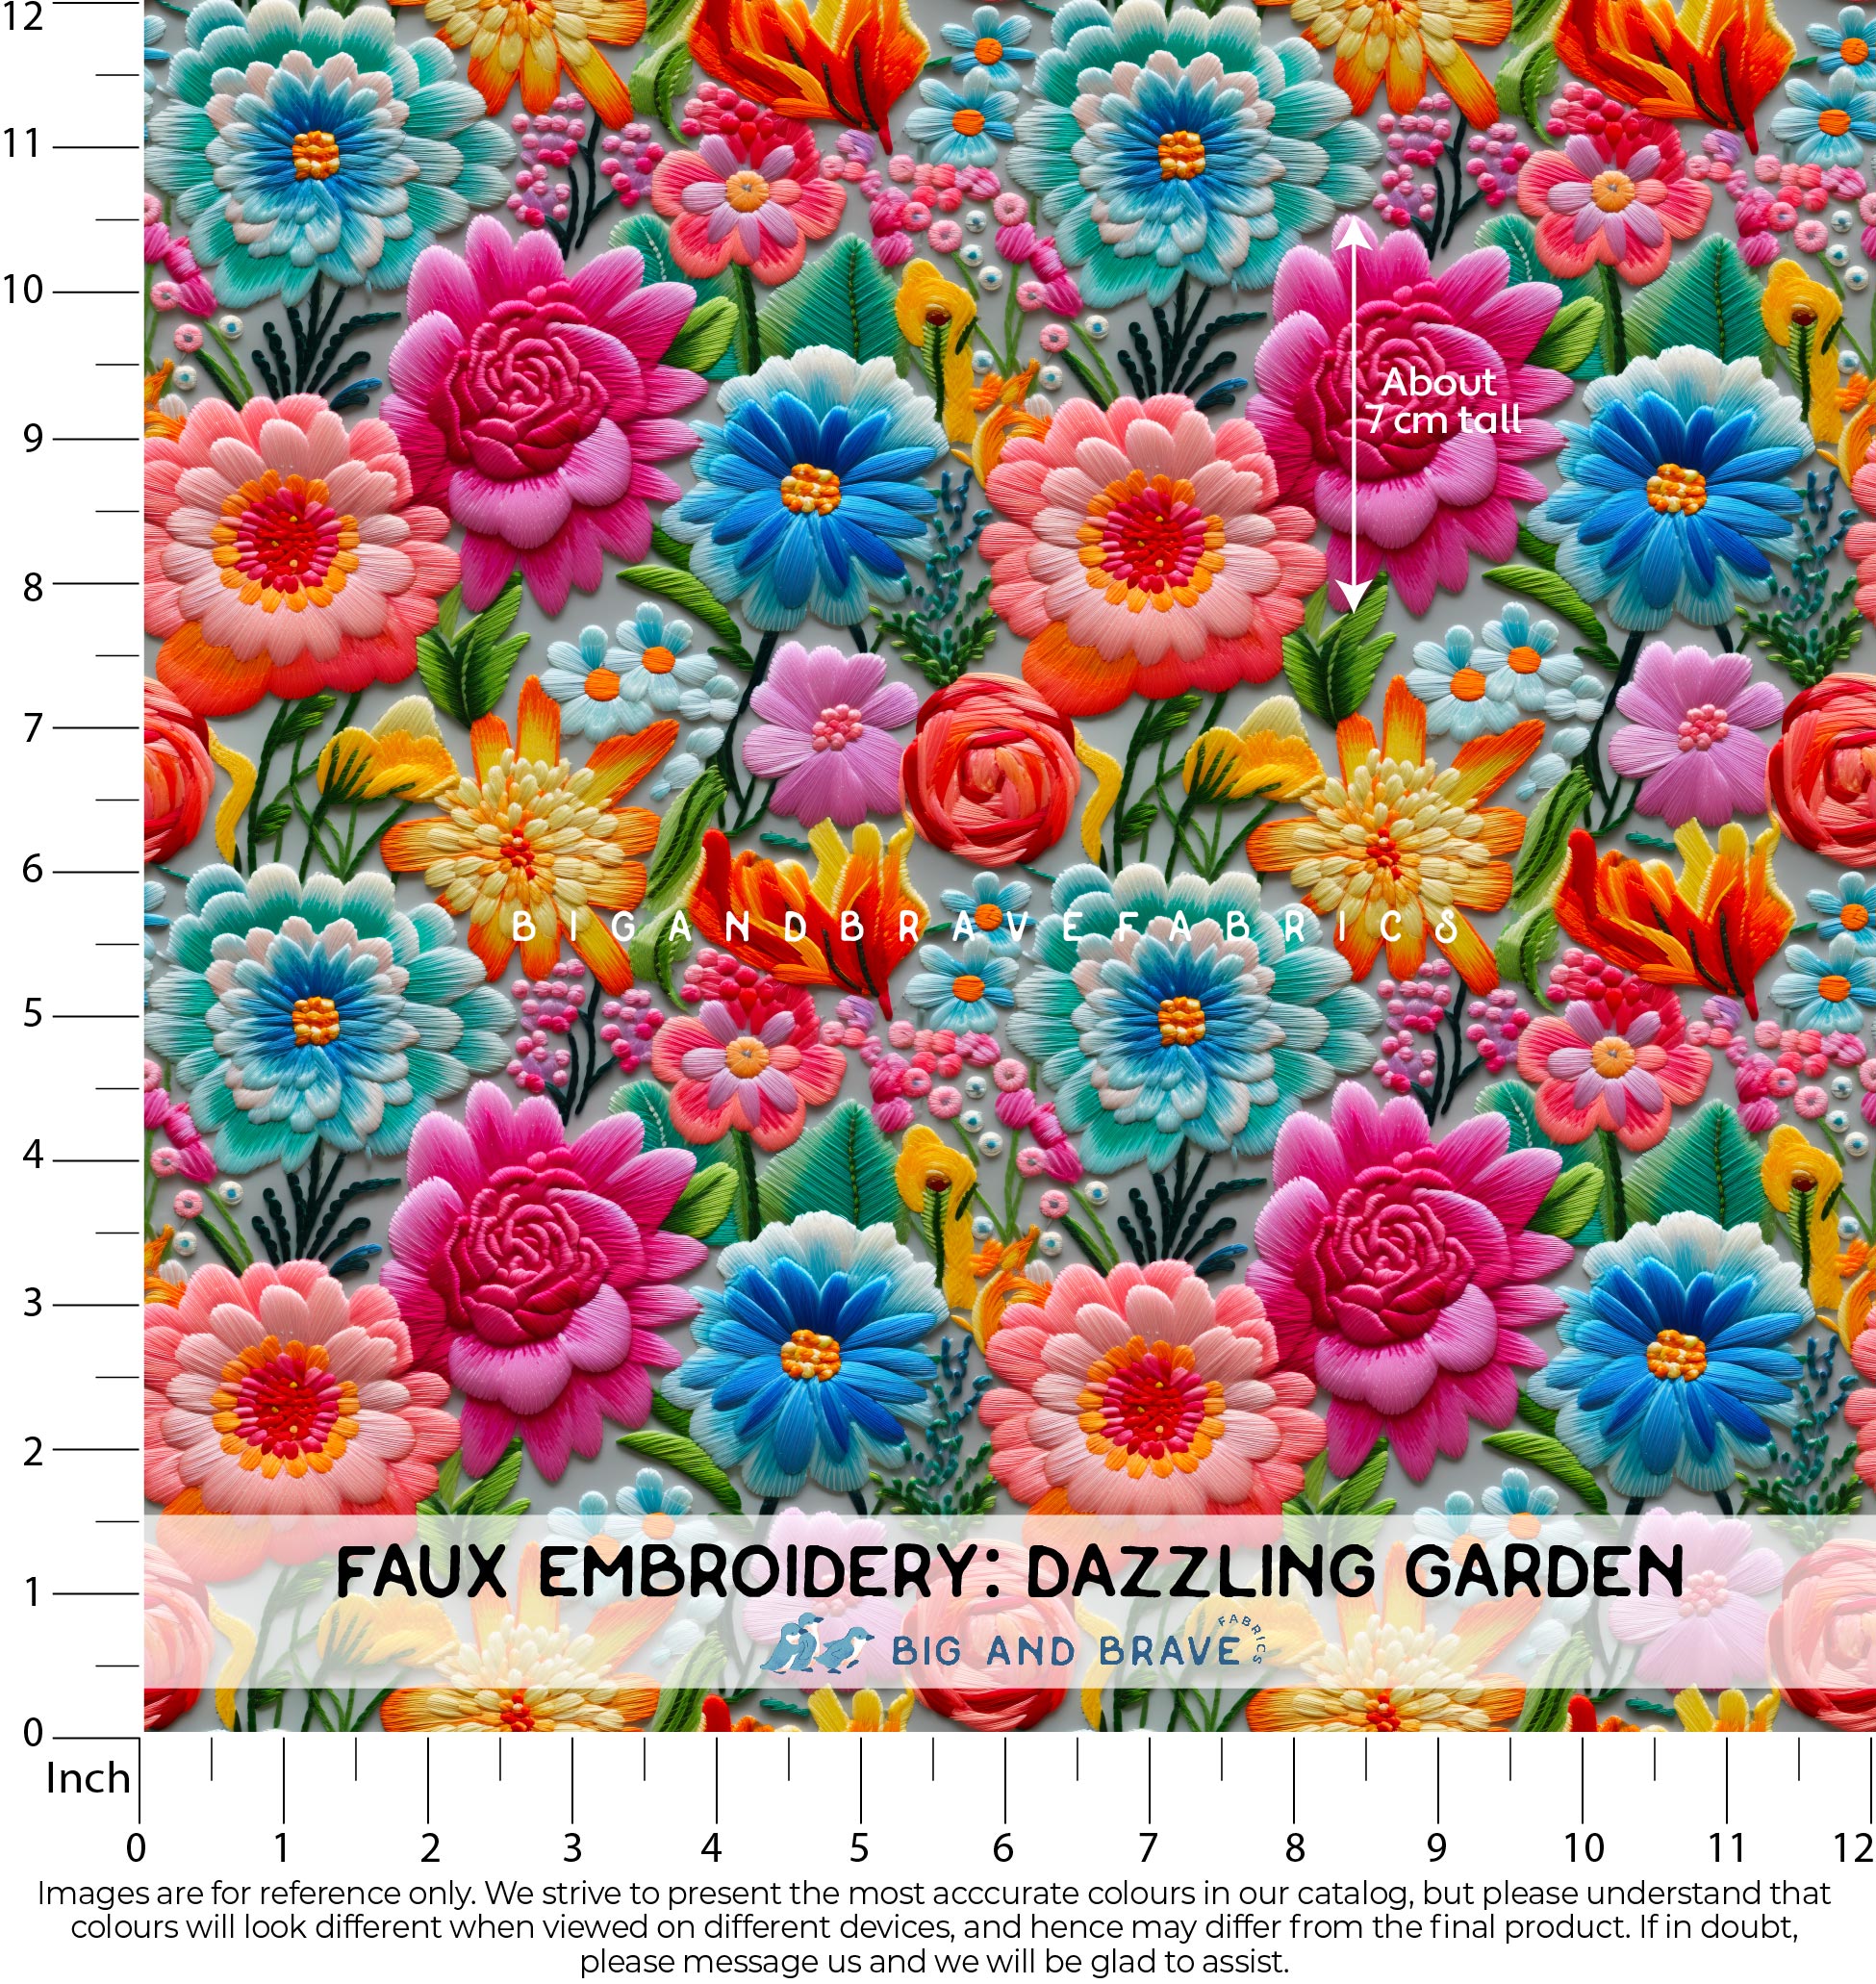 Faux Embroidery, Dazzling Garden